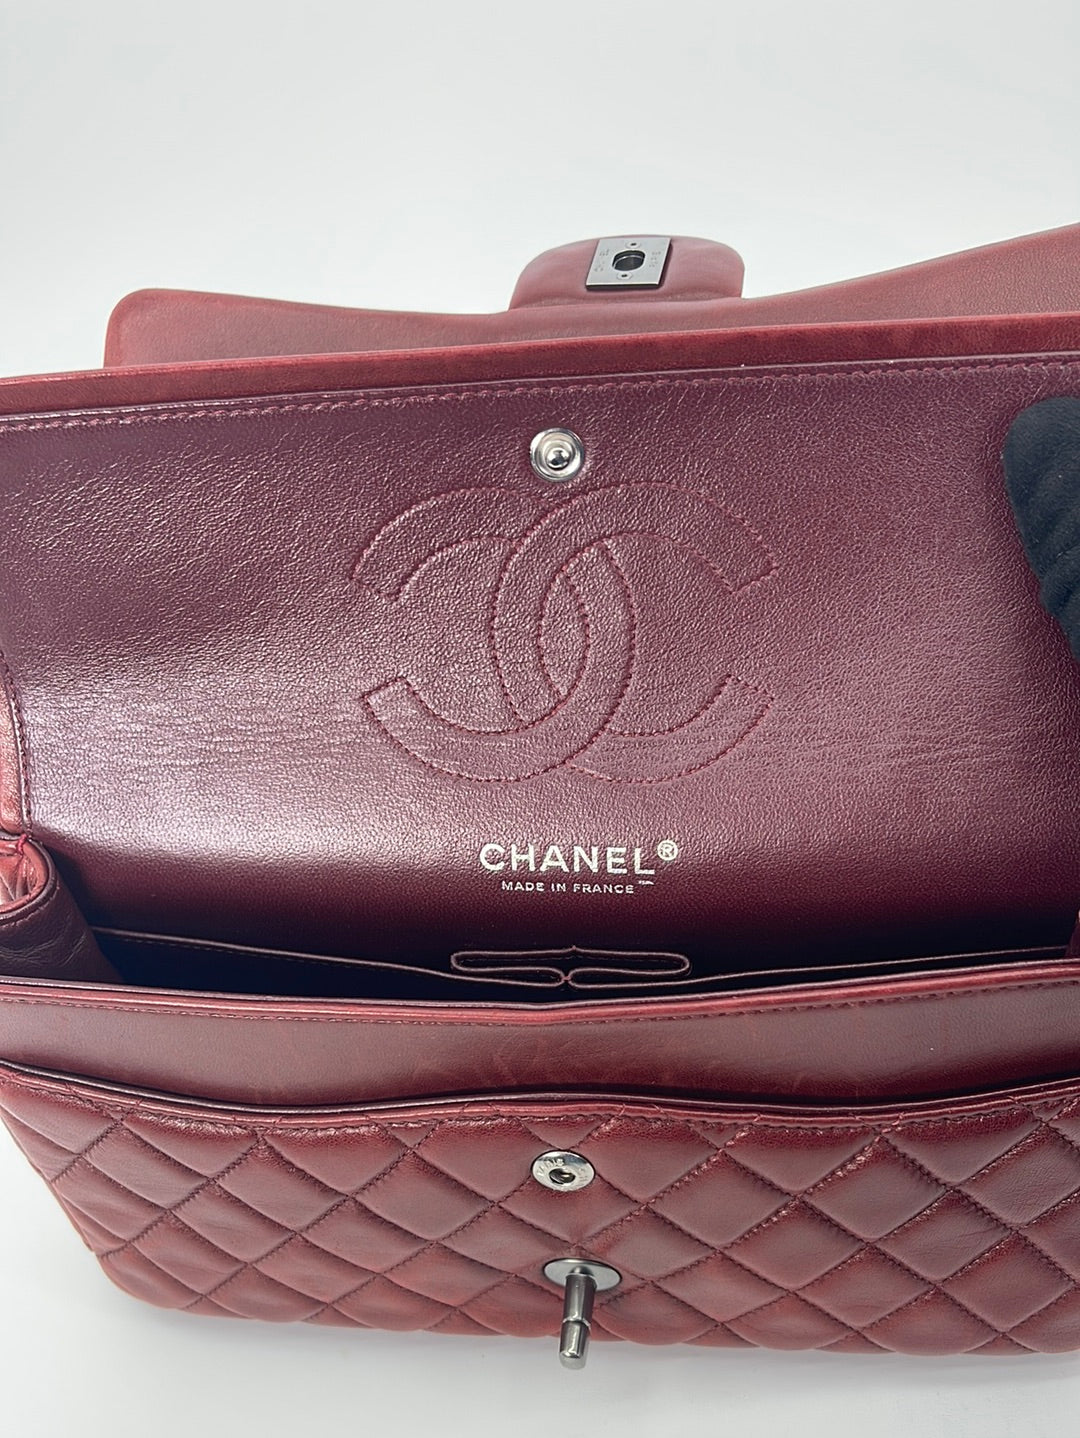 Preloved Vintage CHANEL Burgundy Lambskin Medium Double Flap Matelasse Chain Shoulder Bag 12037622 032223   ** DEAL *** - $900 OFF NO ADDITIONAL DISCOUNTS FOR THIS ITEM ** LIVE SHOW DEAL ONLY****